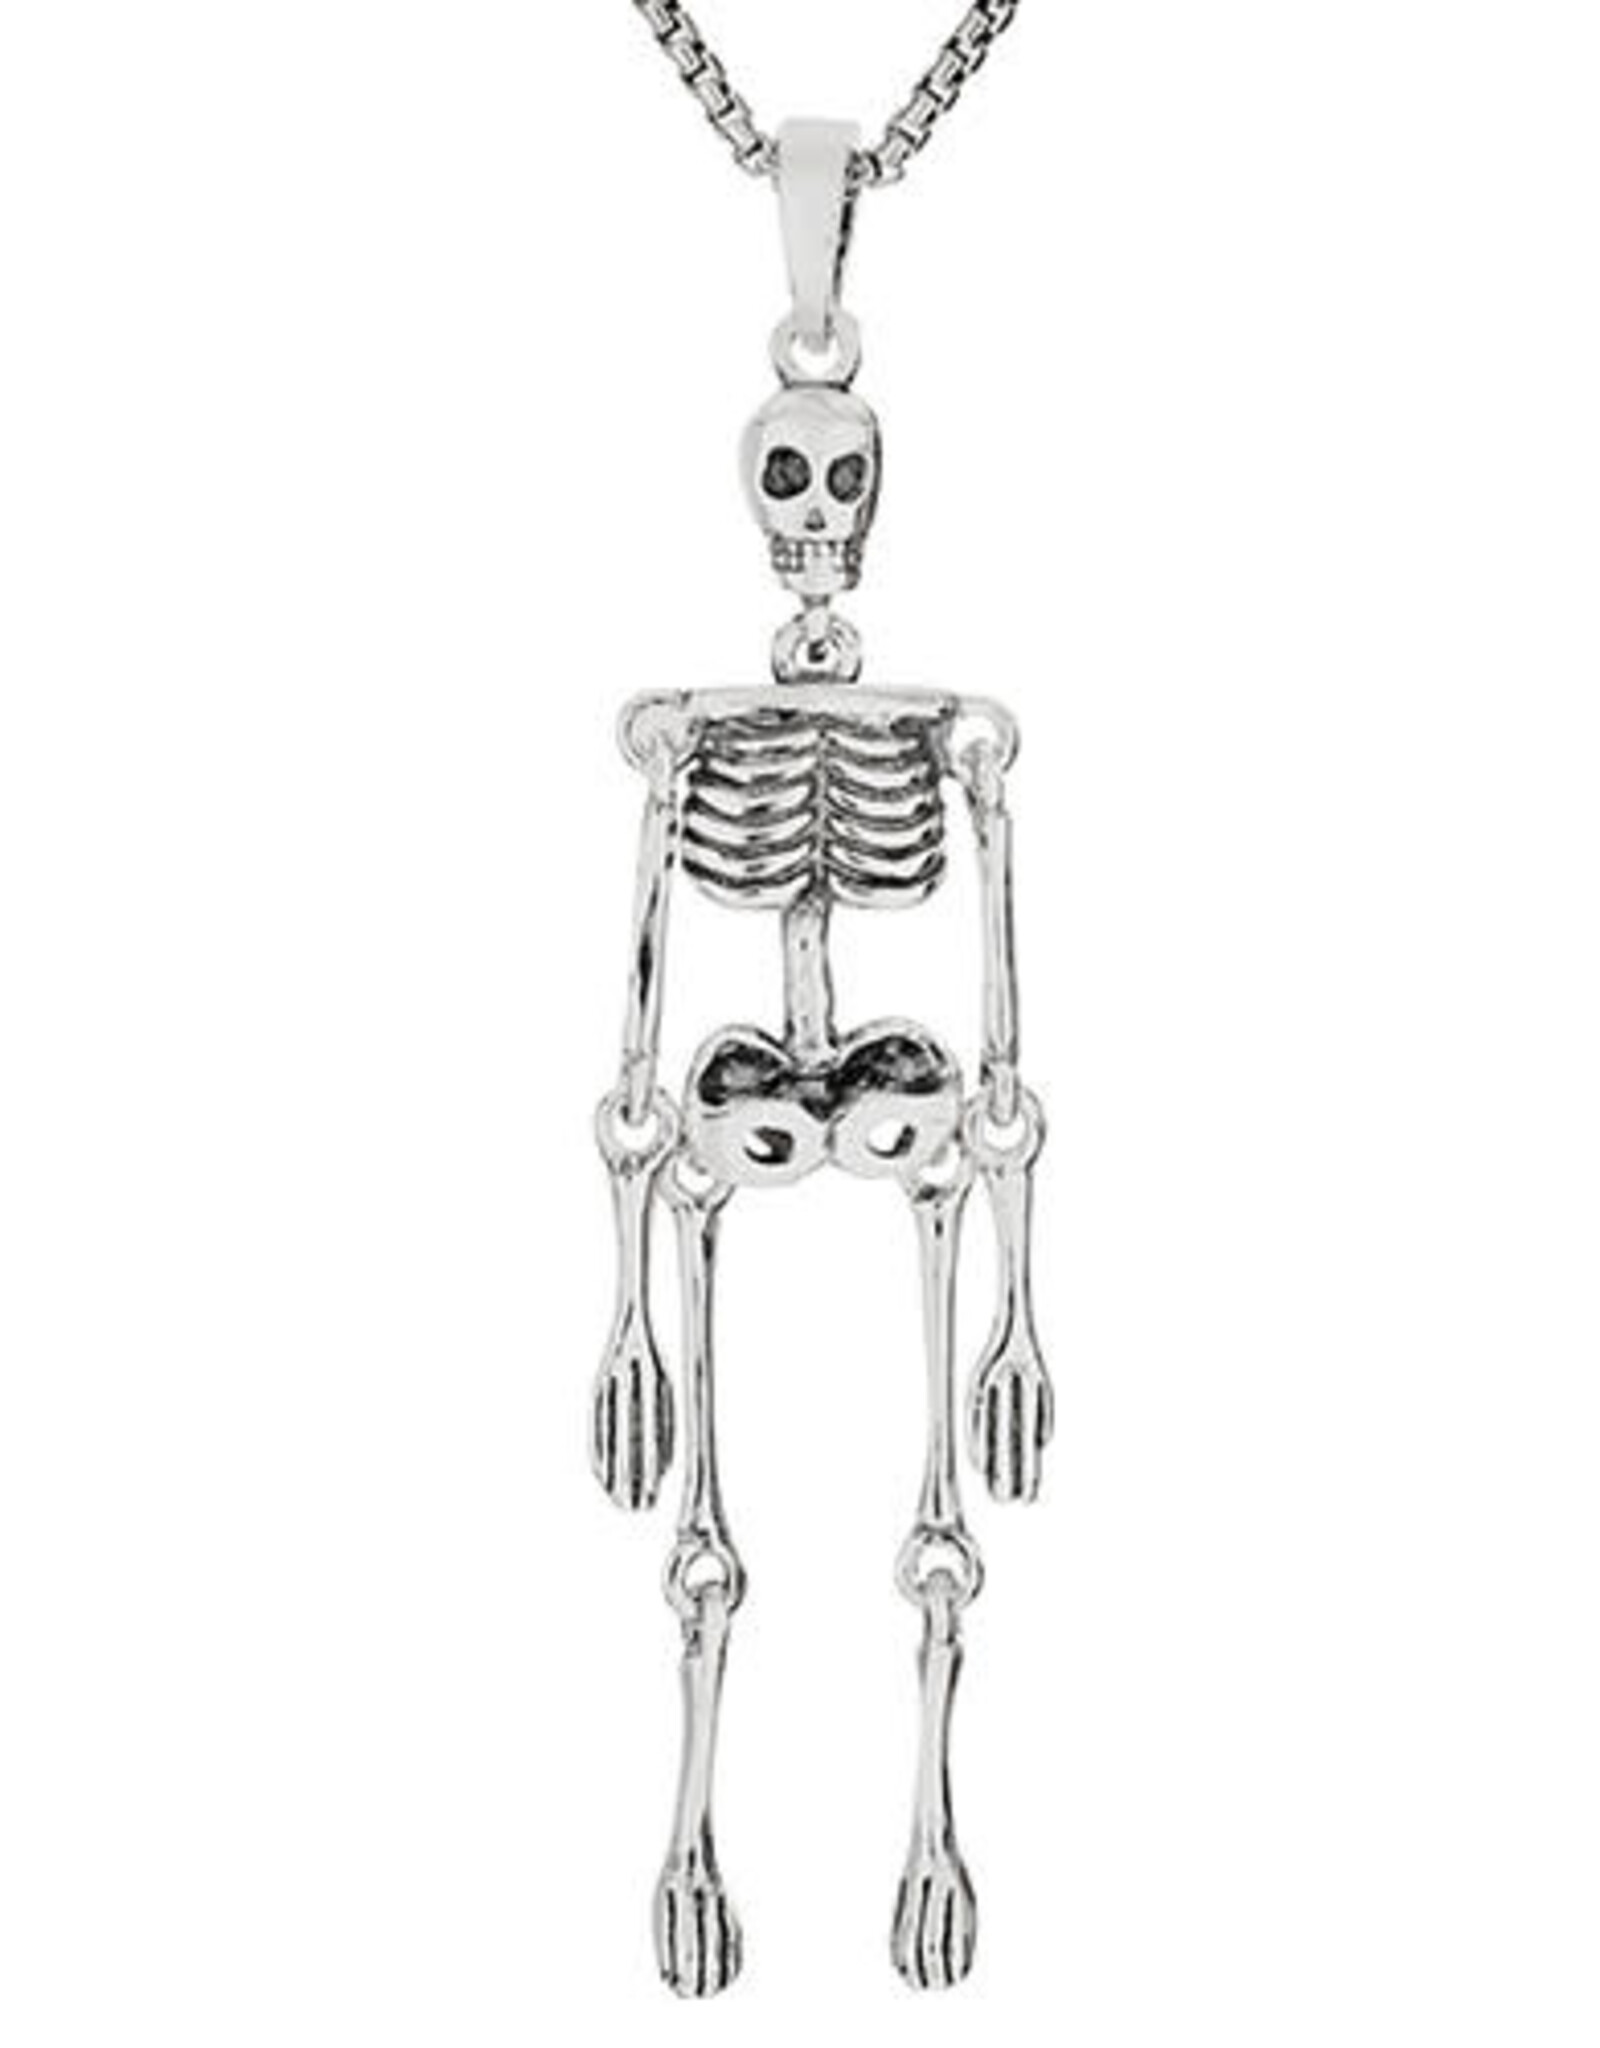 Tiger Mountain MOVING SKELETON NECKLACE - sterling silver